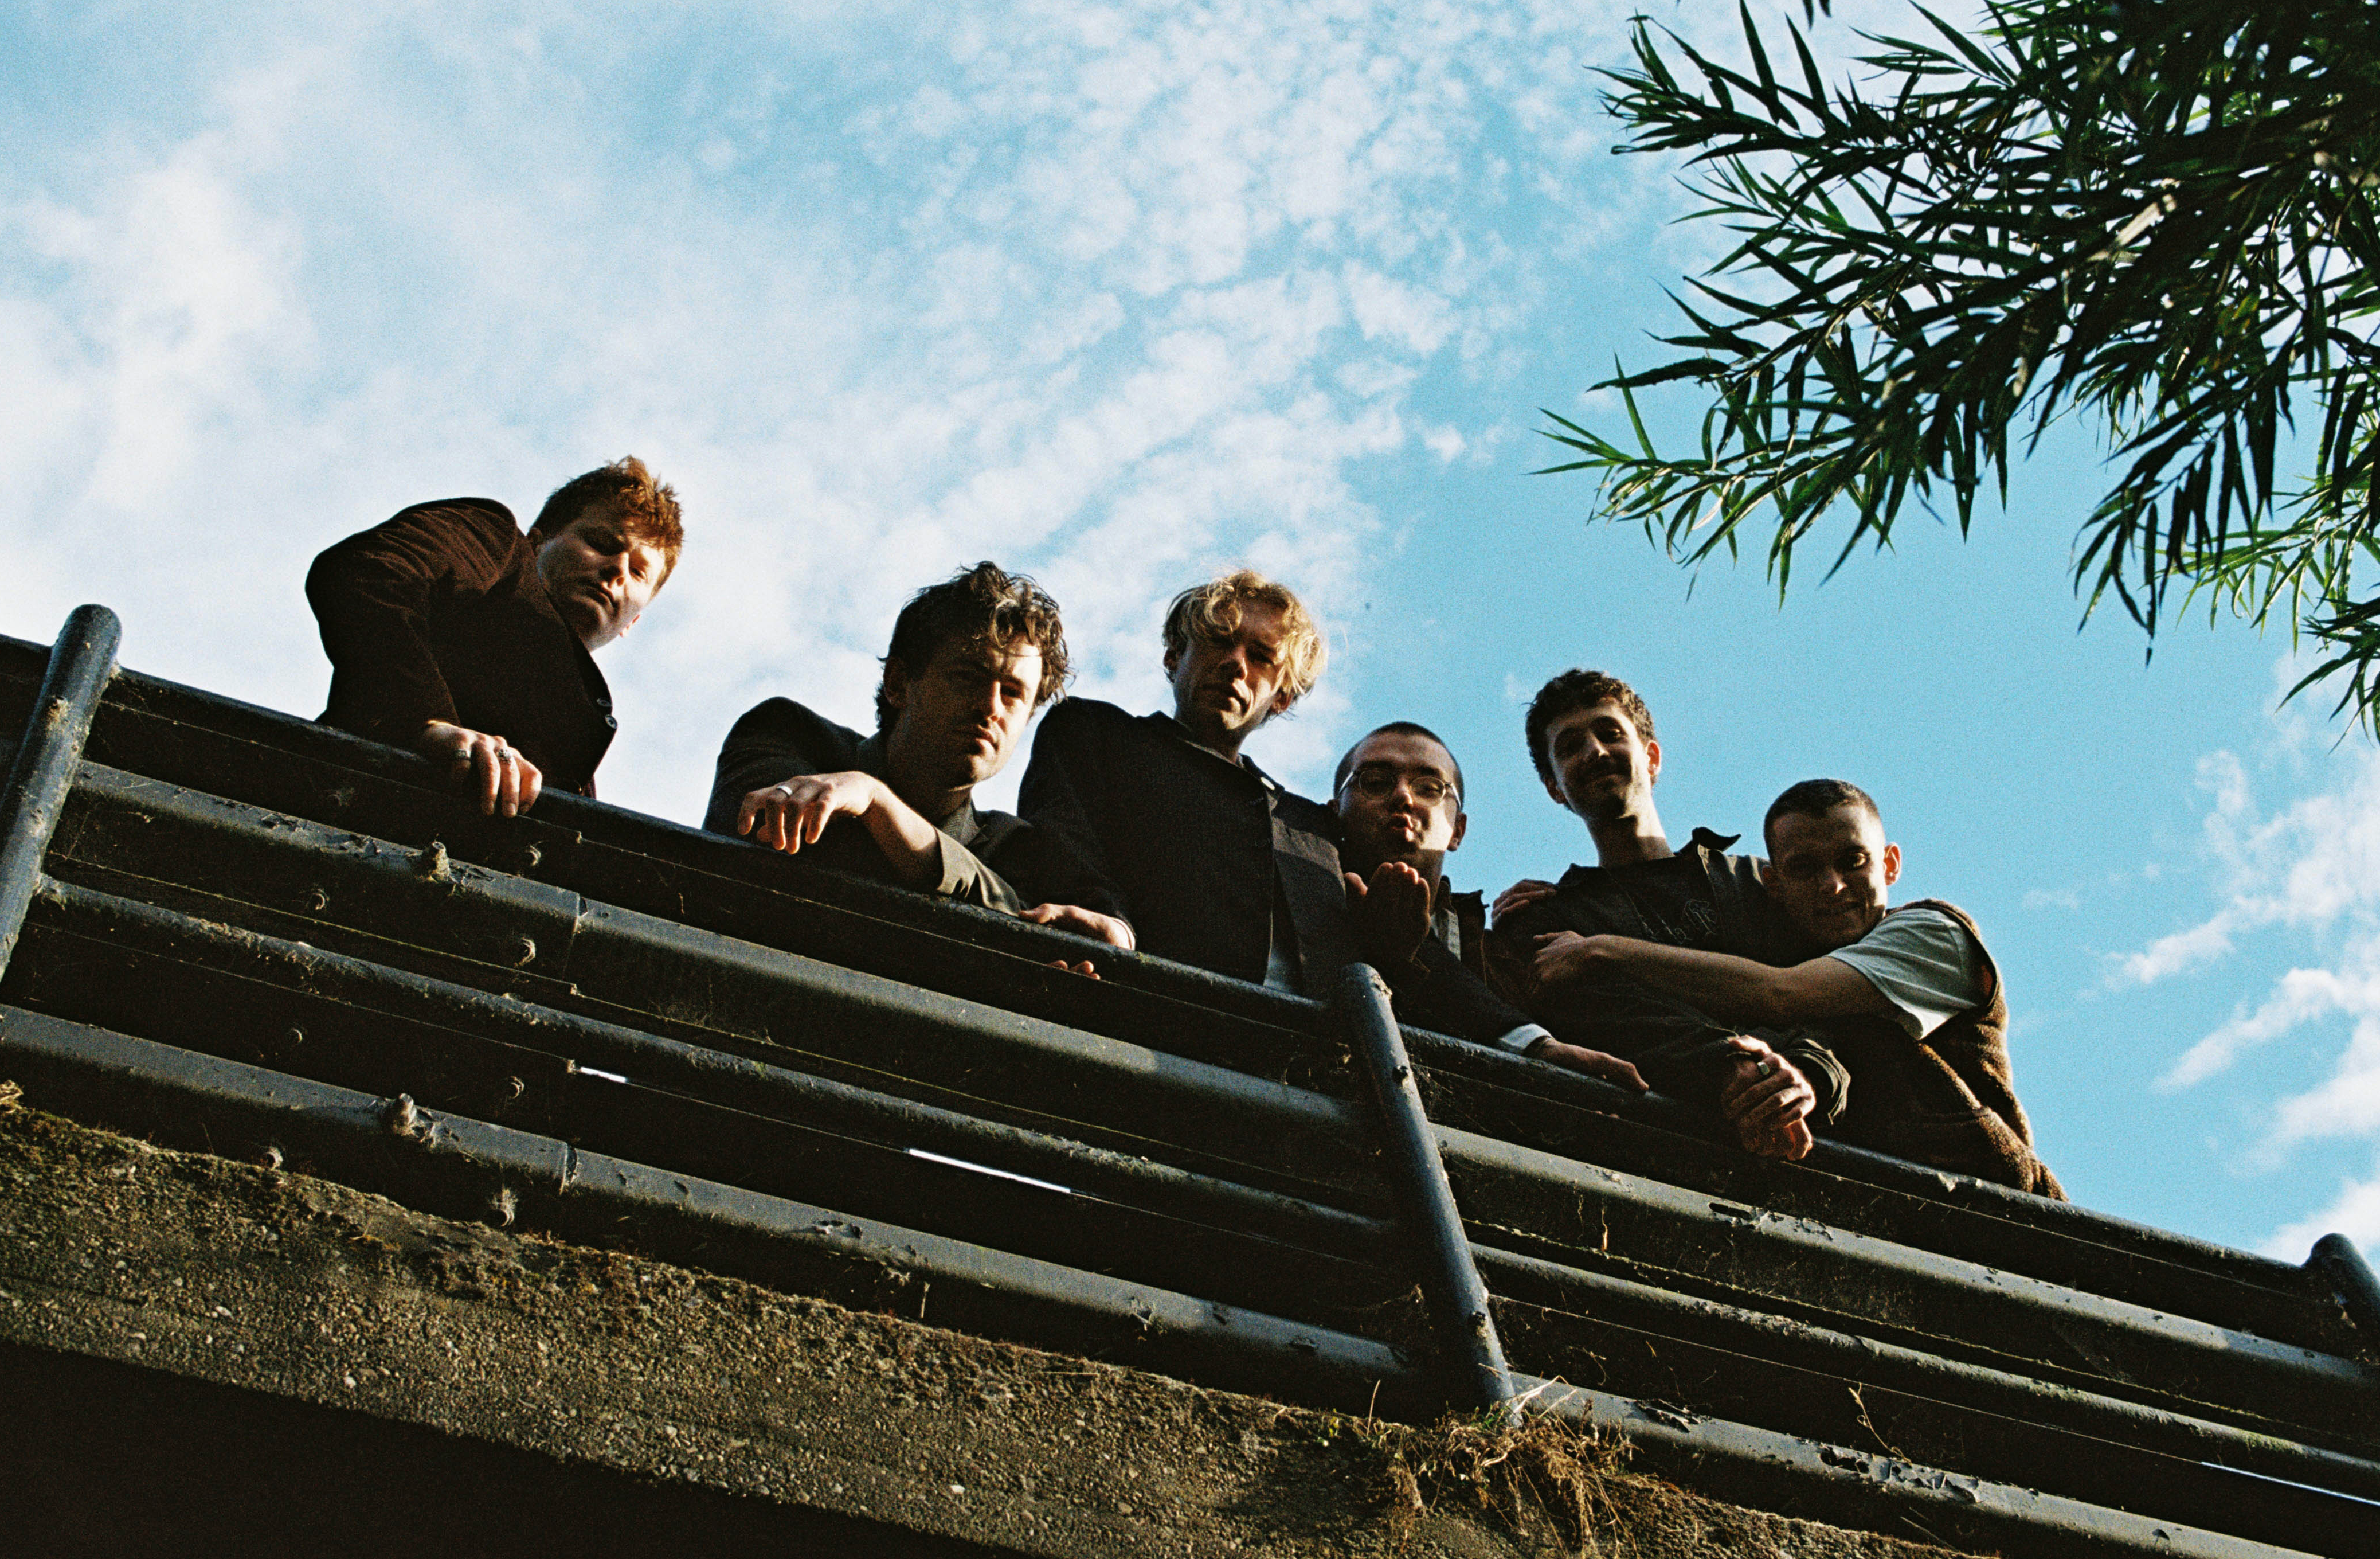 The six members of the band Flat Party looking down into the camera from a bridge